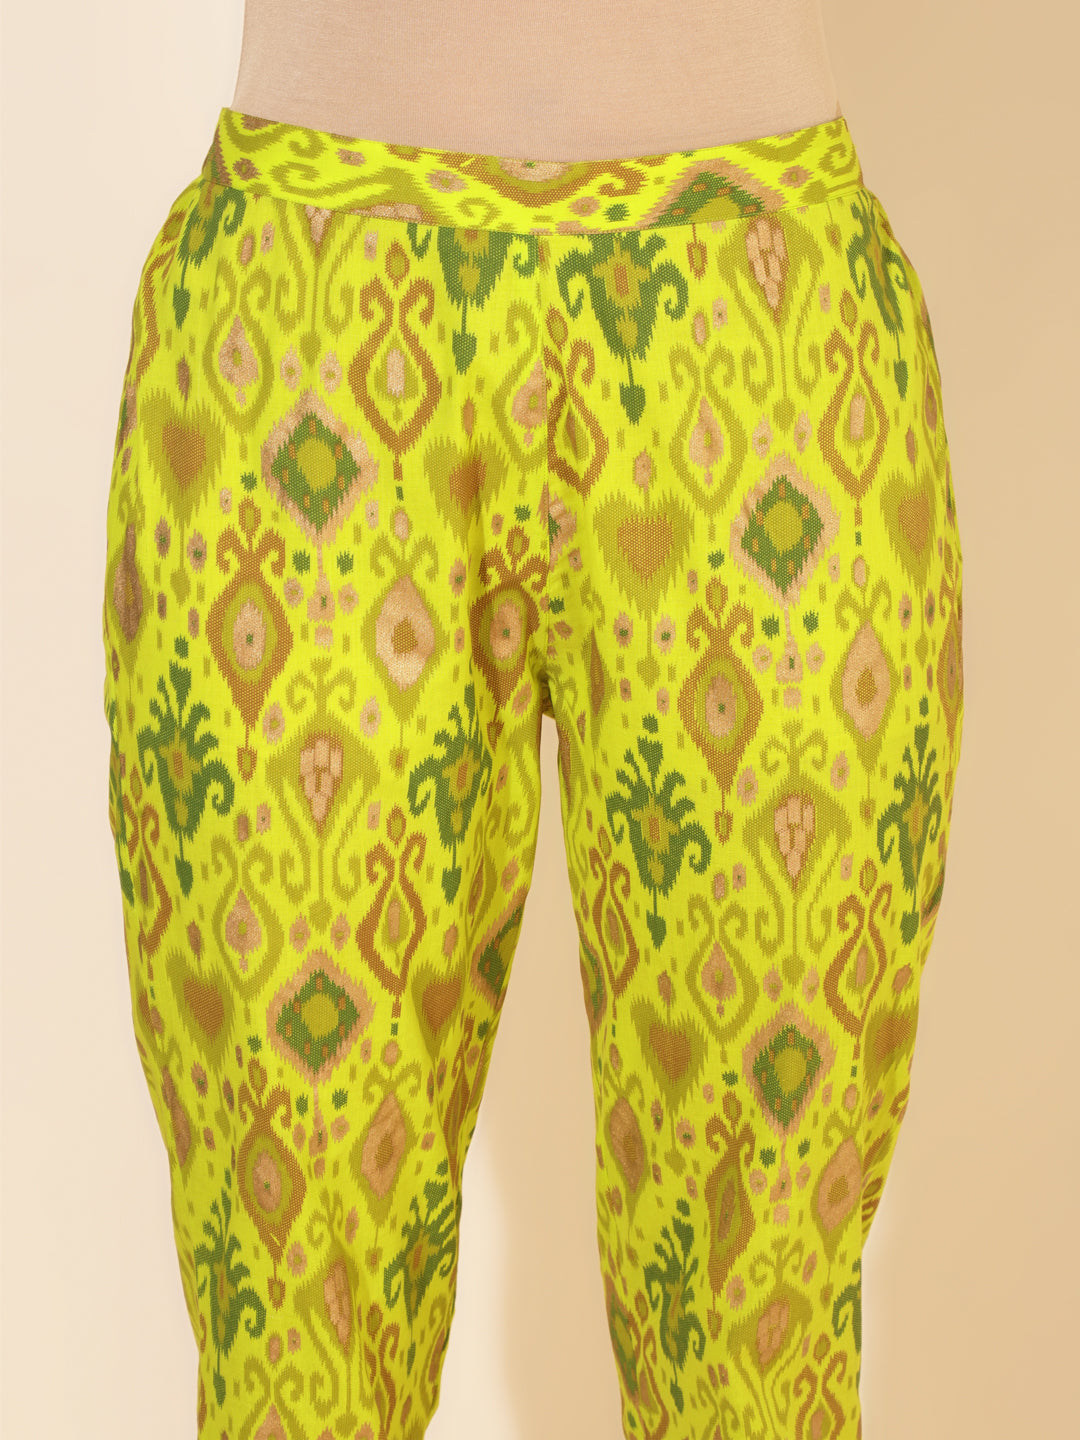 Lime Green Cotton Ikat Printed Co-ord Set